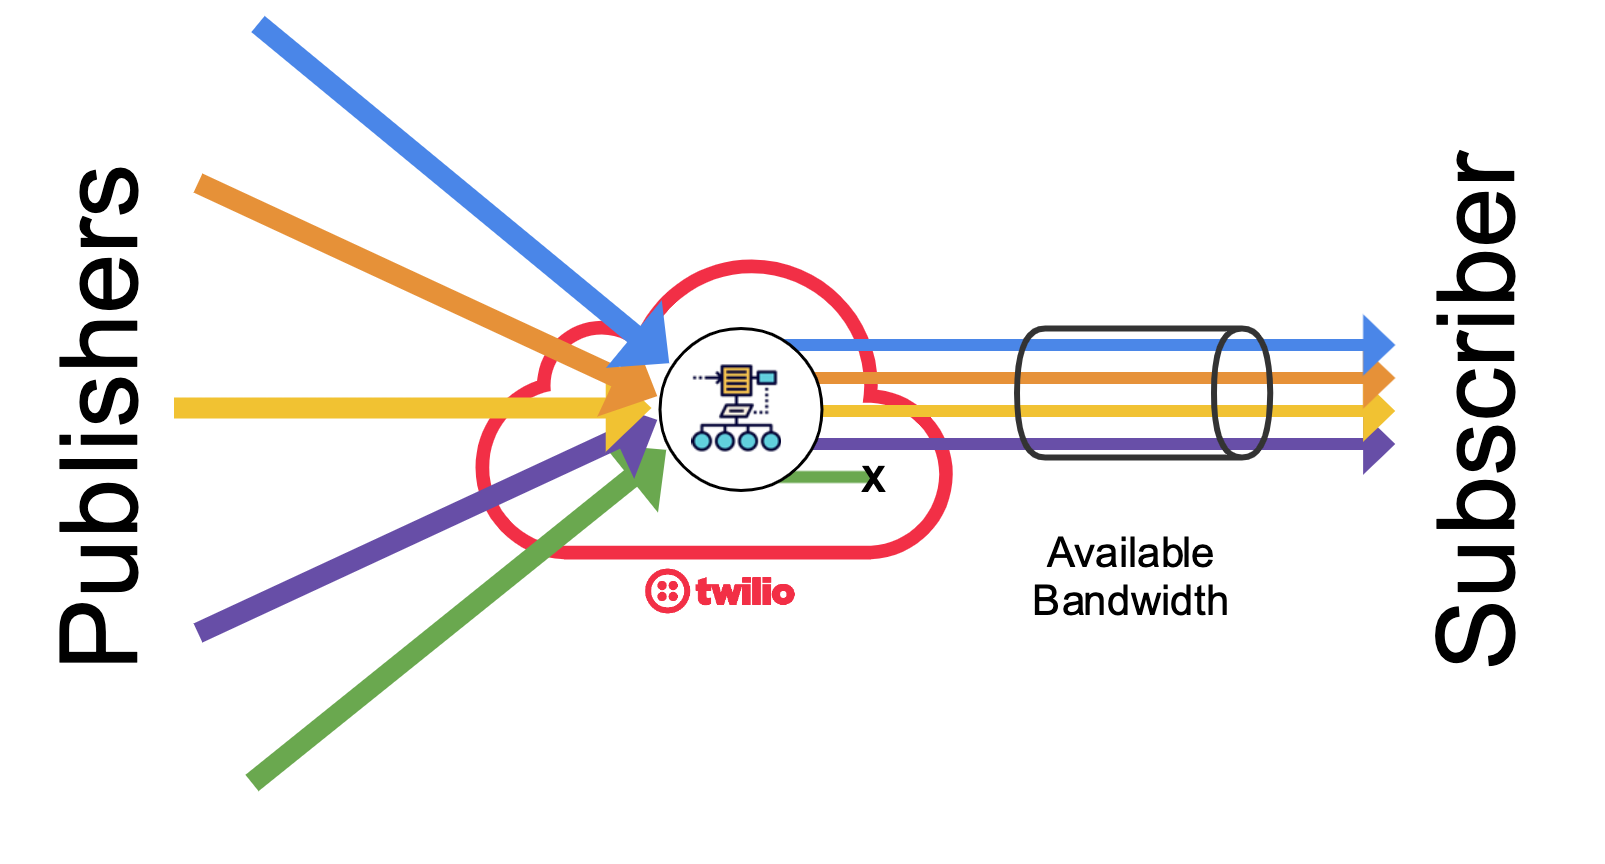 Twilio bandwidth allocation algorithms may completely switch-off the less relevant video tracks.